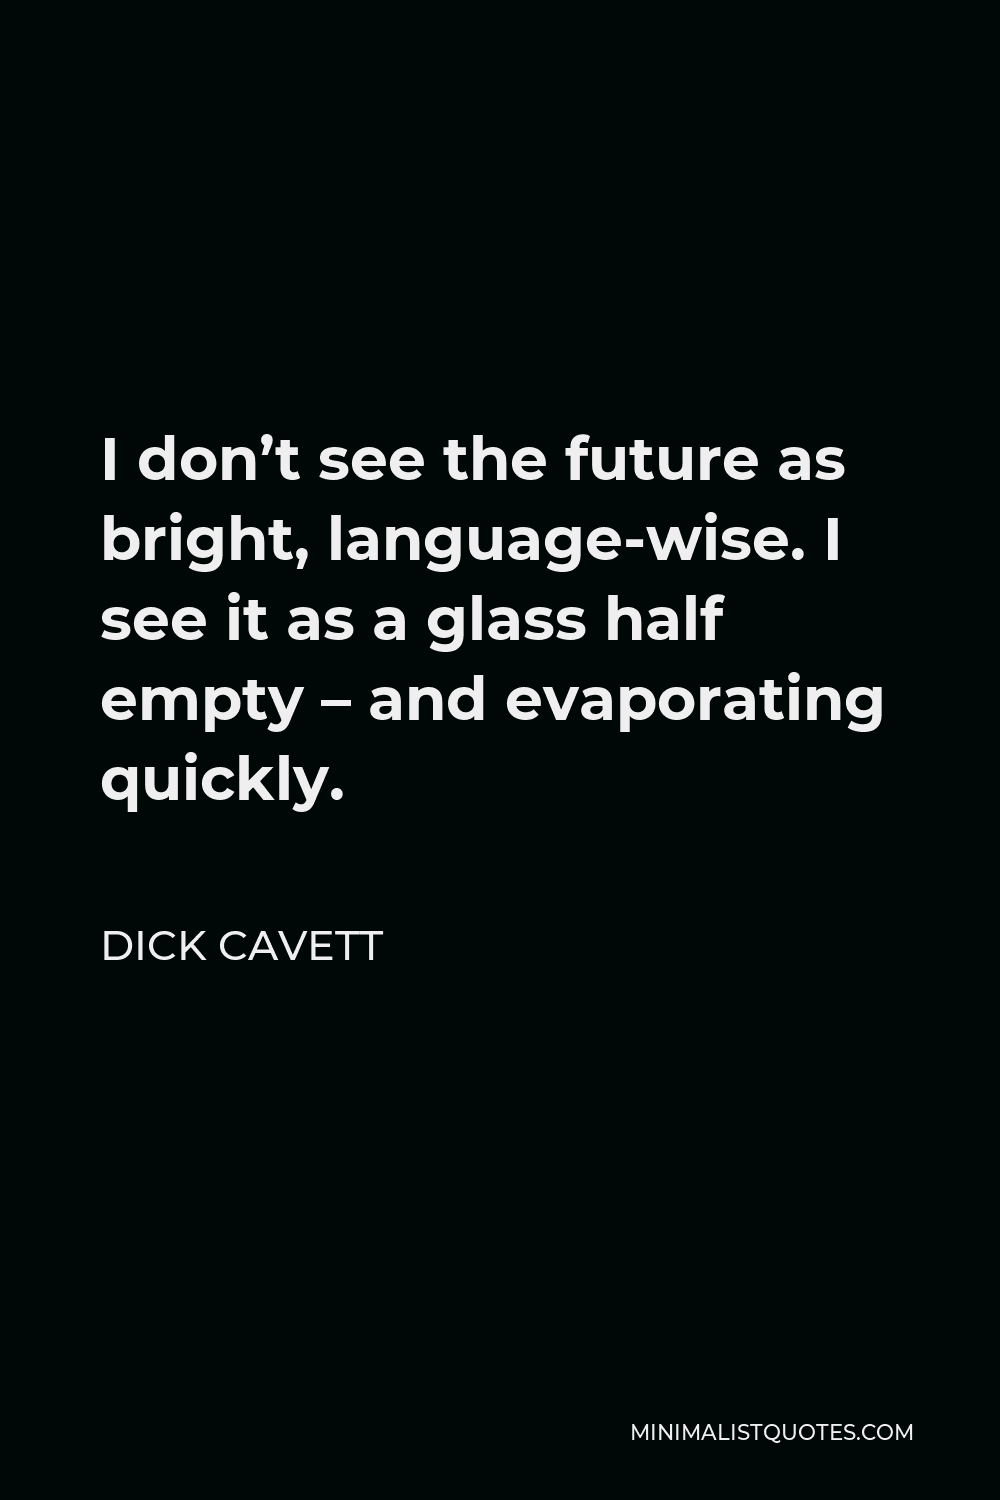 Dick Cavett Quote - I don’t see the future as bright, language-wise. I see it as a glass half empty – and evaporating quickly.